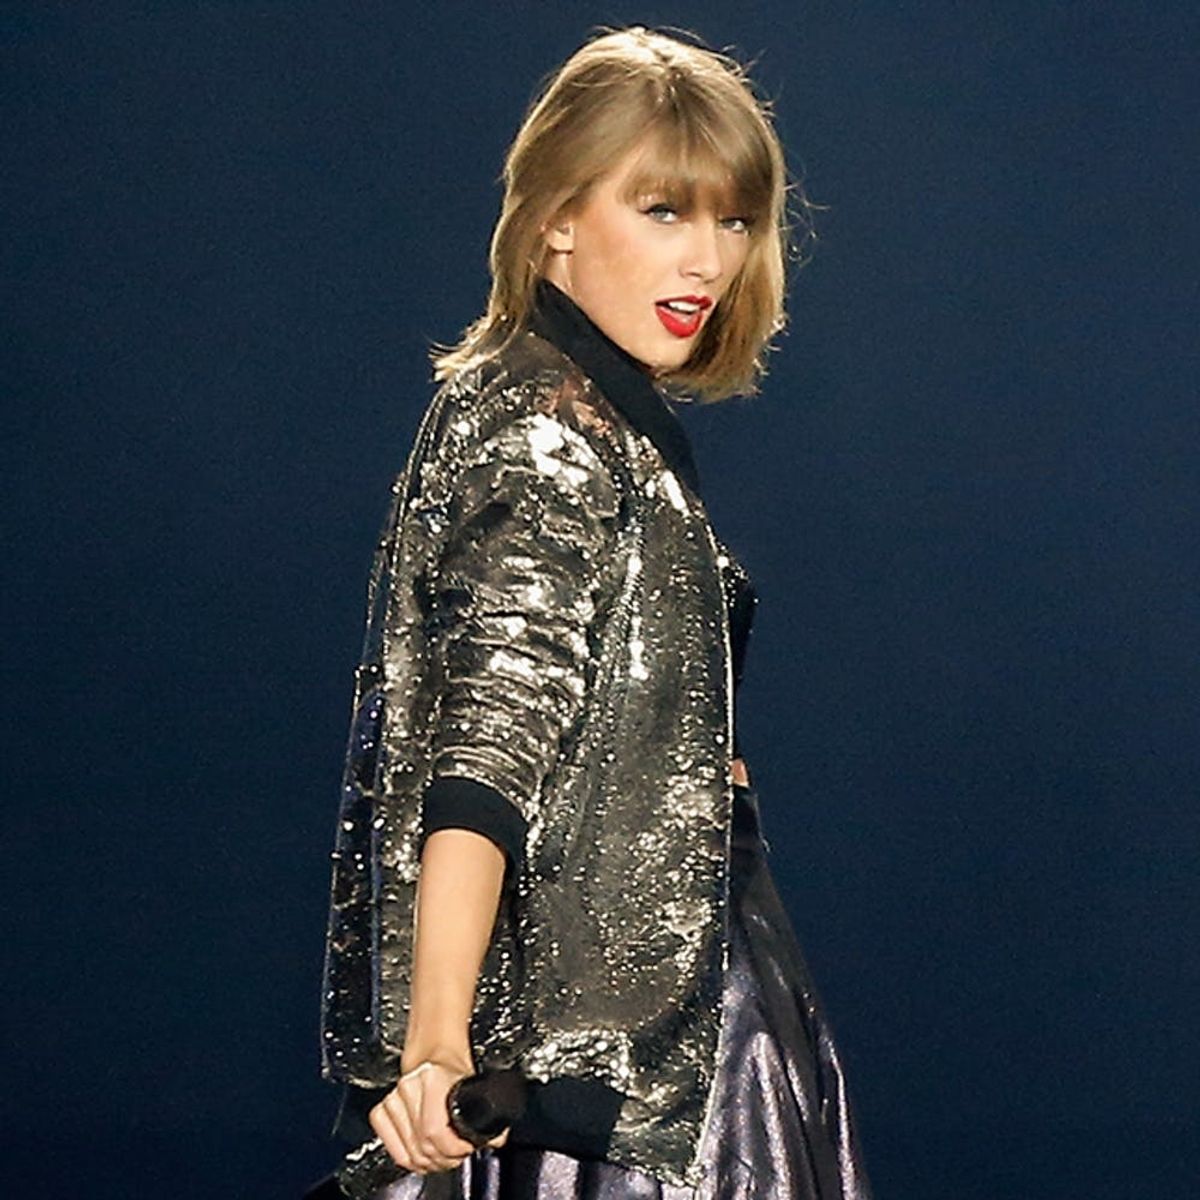 Taylor Swift Proves She’s a Pro at This Holiday Tradition